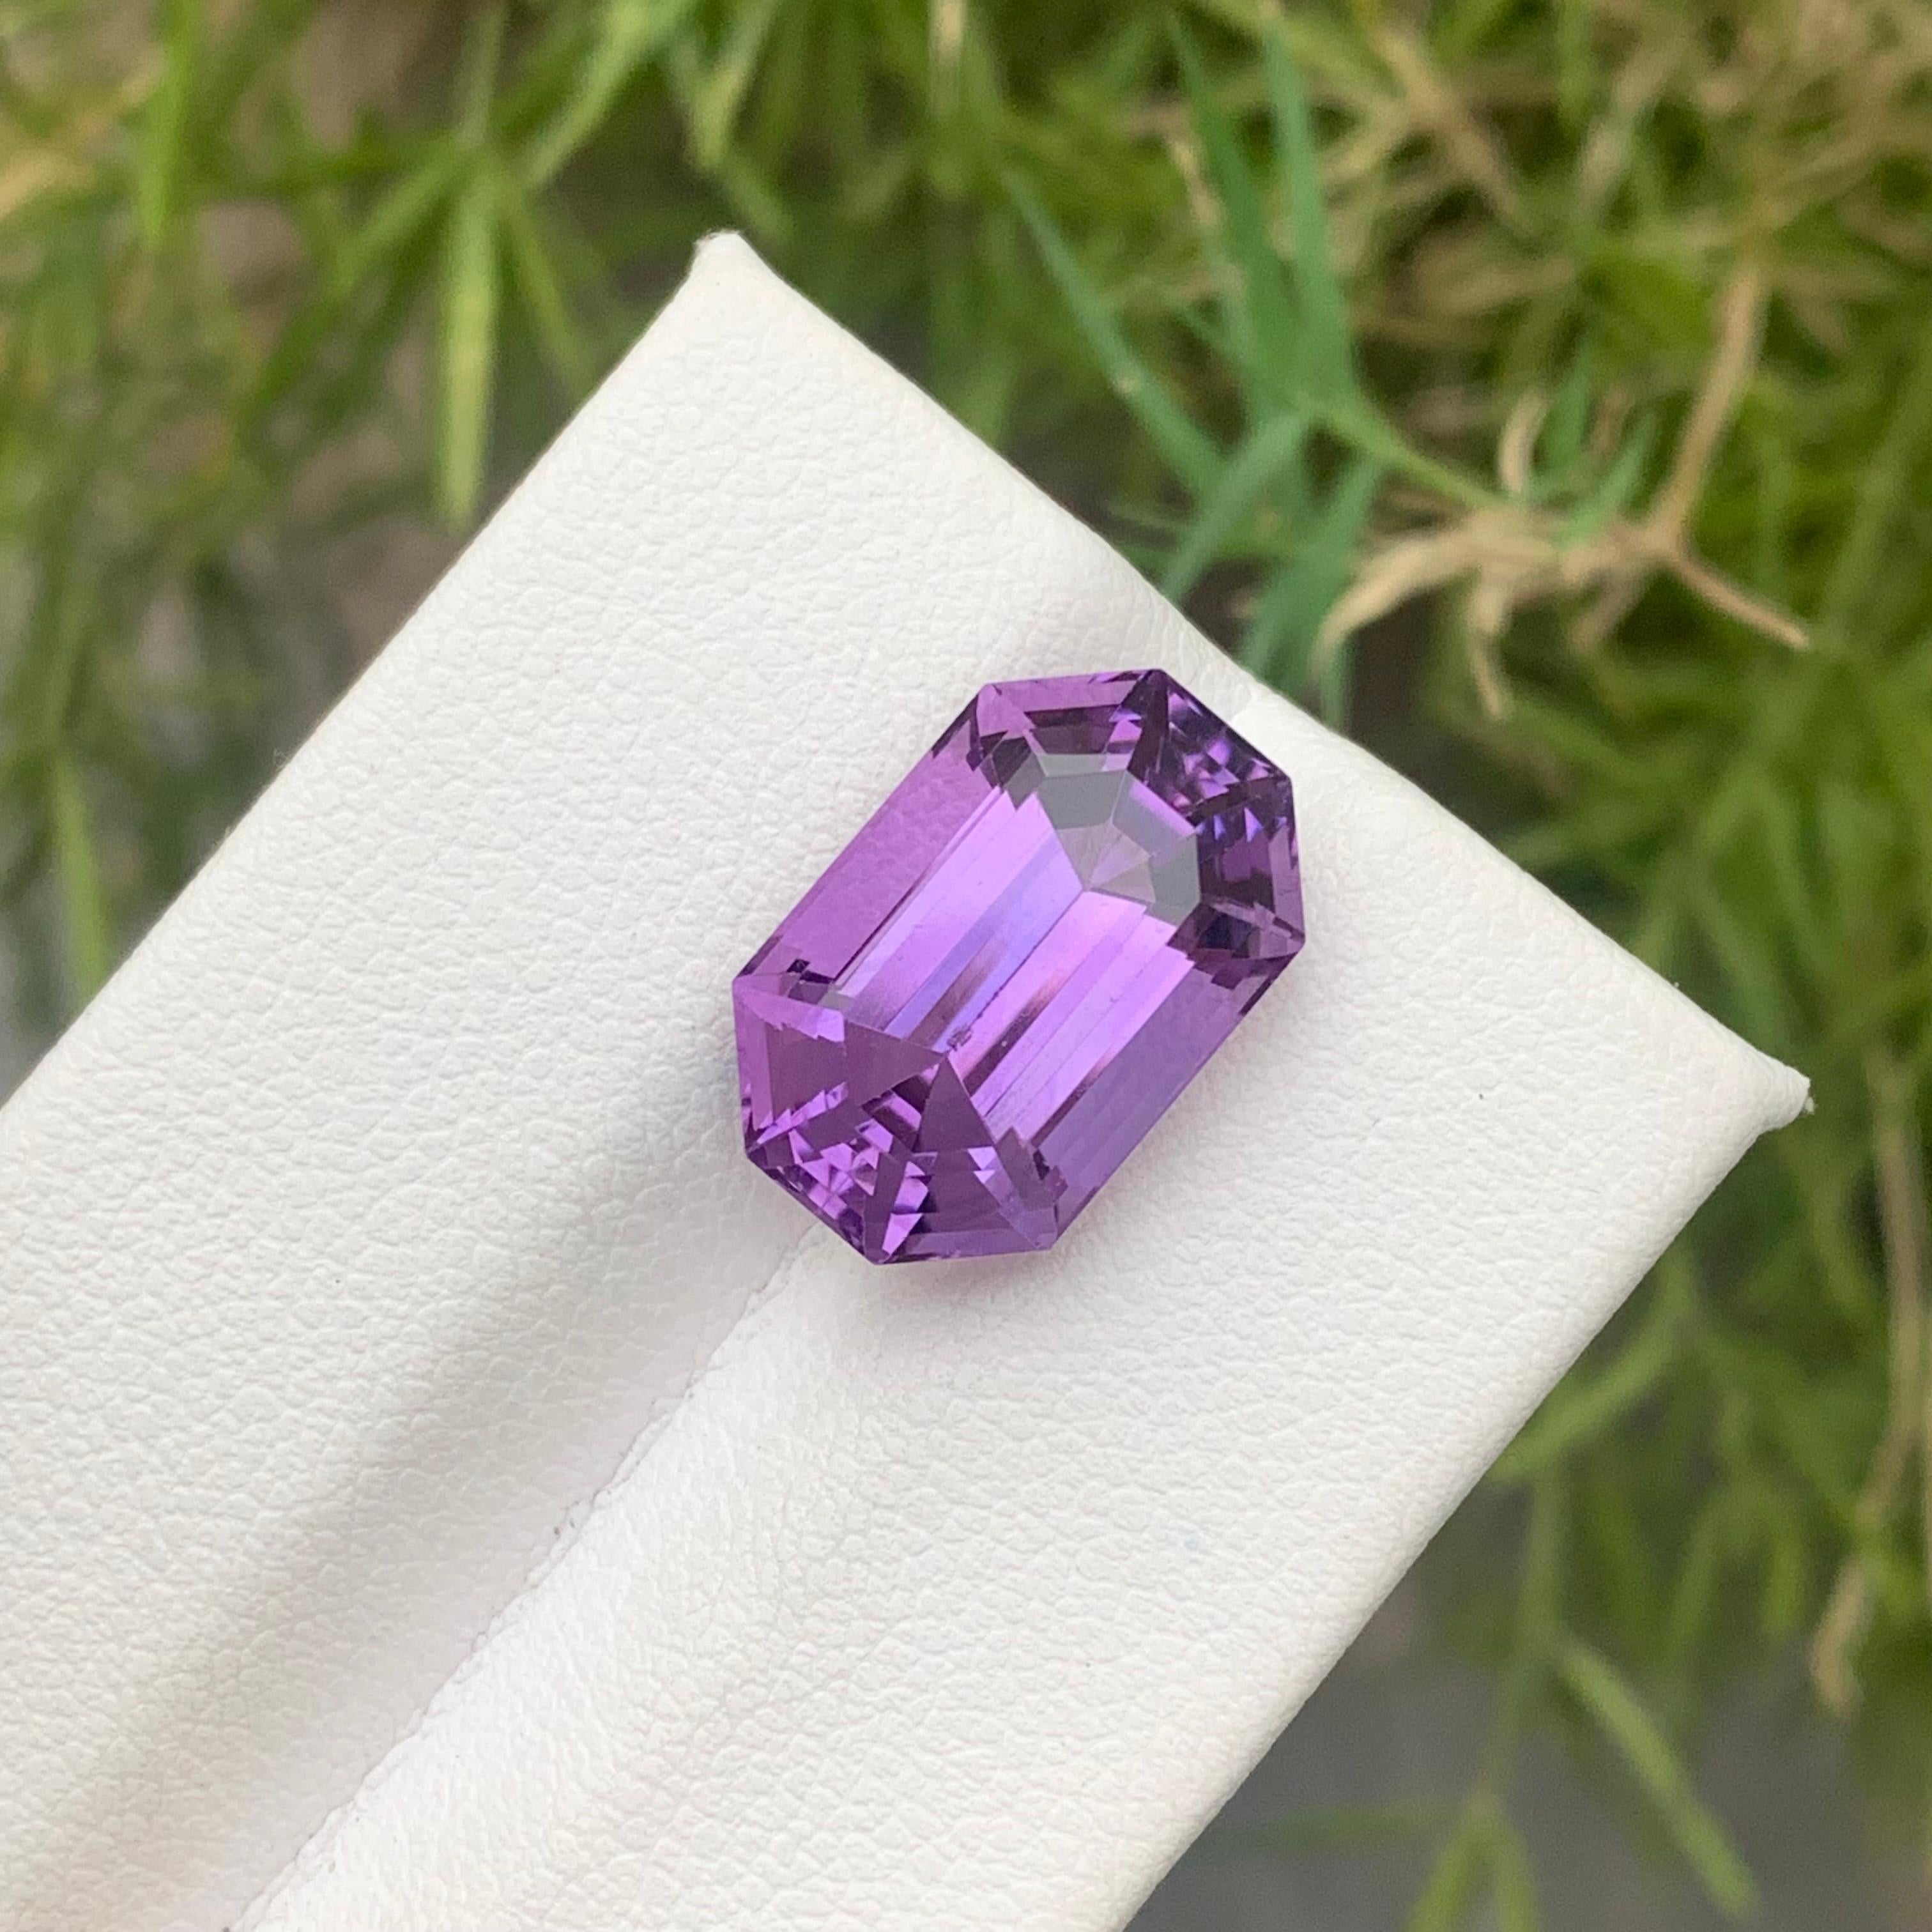 Gemstone Type : Amethyst
Weight : 8.60 Carats
Dimensions: 15.3x9.8x8.7 mm
Clarity : Clean
Origin : Brazil
Color: Purple
Shape: Emerald
Facet: Emerald Cut
Certificate: On Demand
Month: February
.
Purported amethyst powers for healing
enhancing the